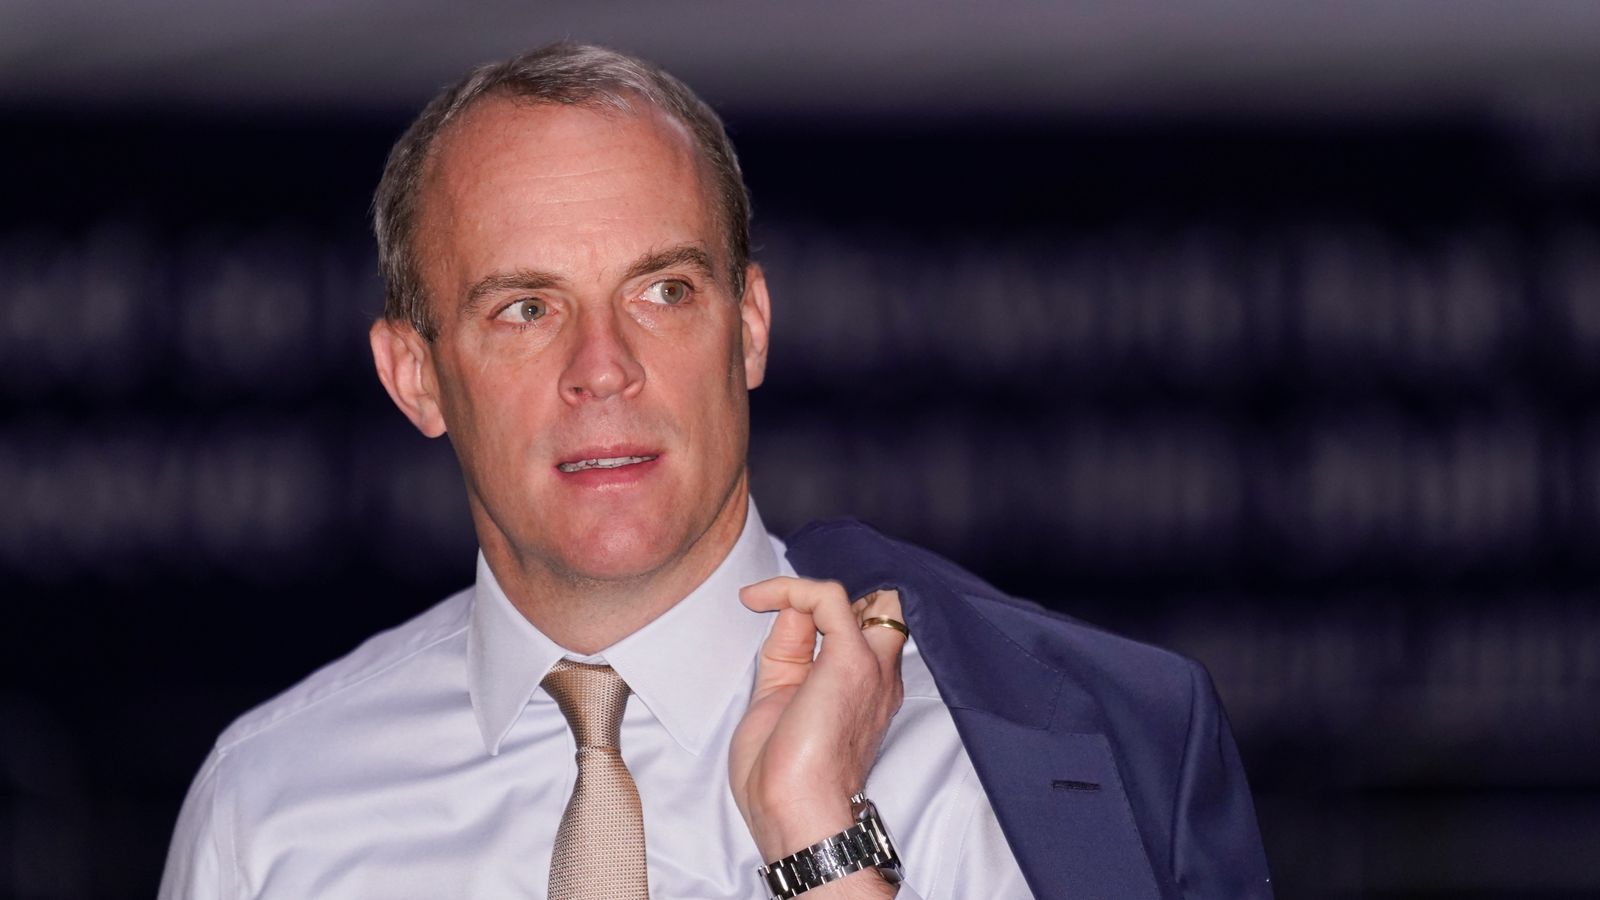 PM must stand up for civil service after Dominic Raab's attacks, says ex-Foreign Office chief